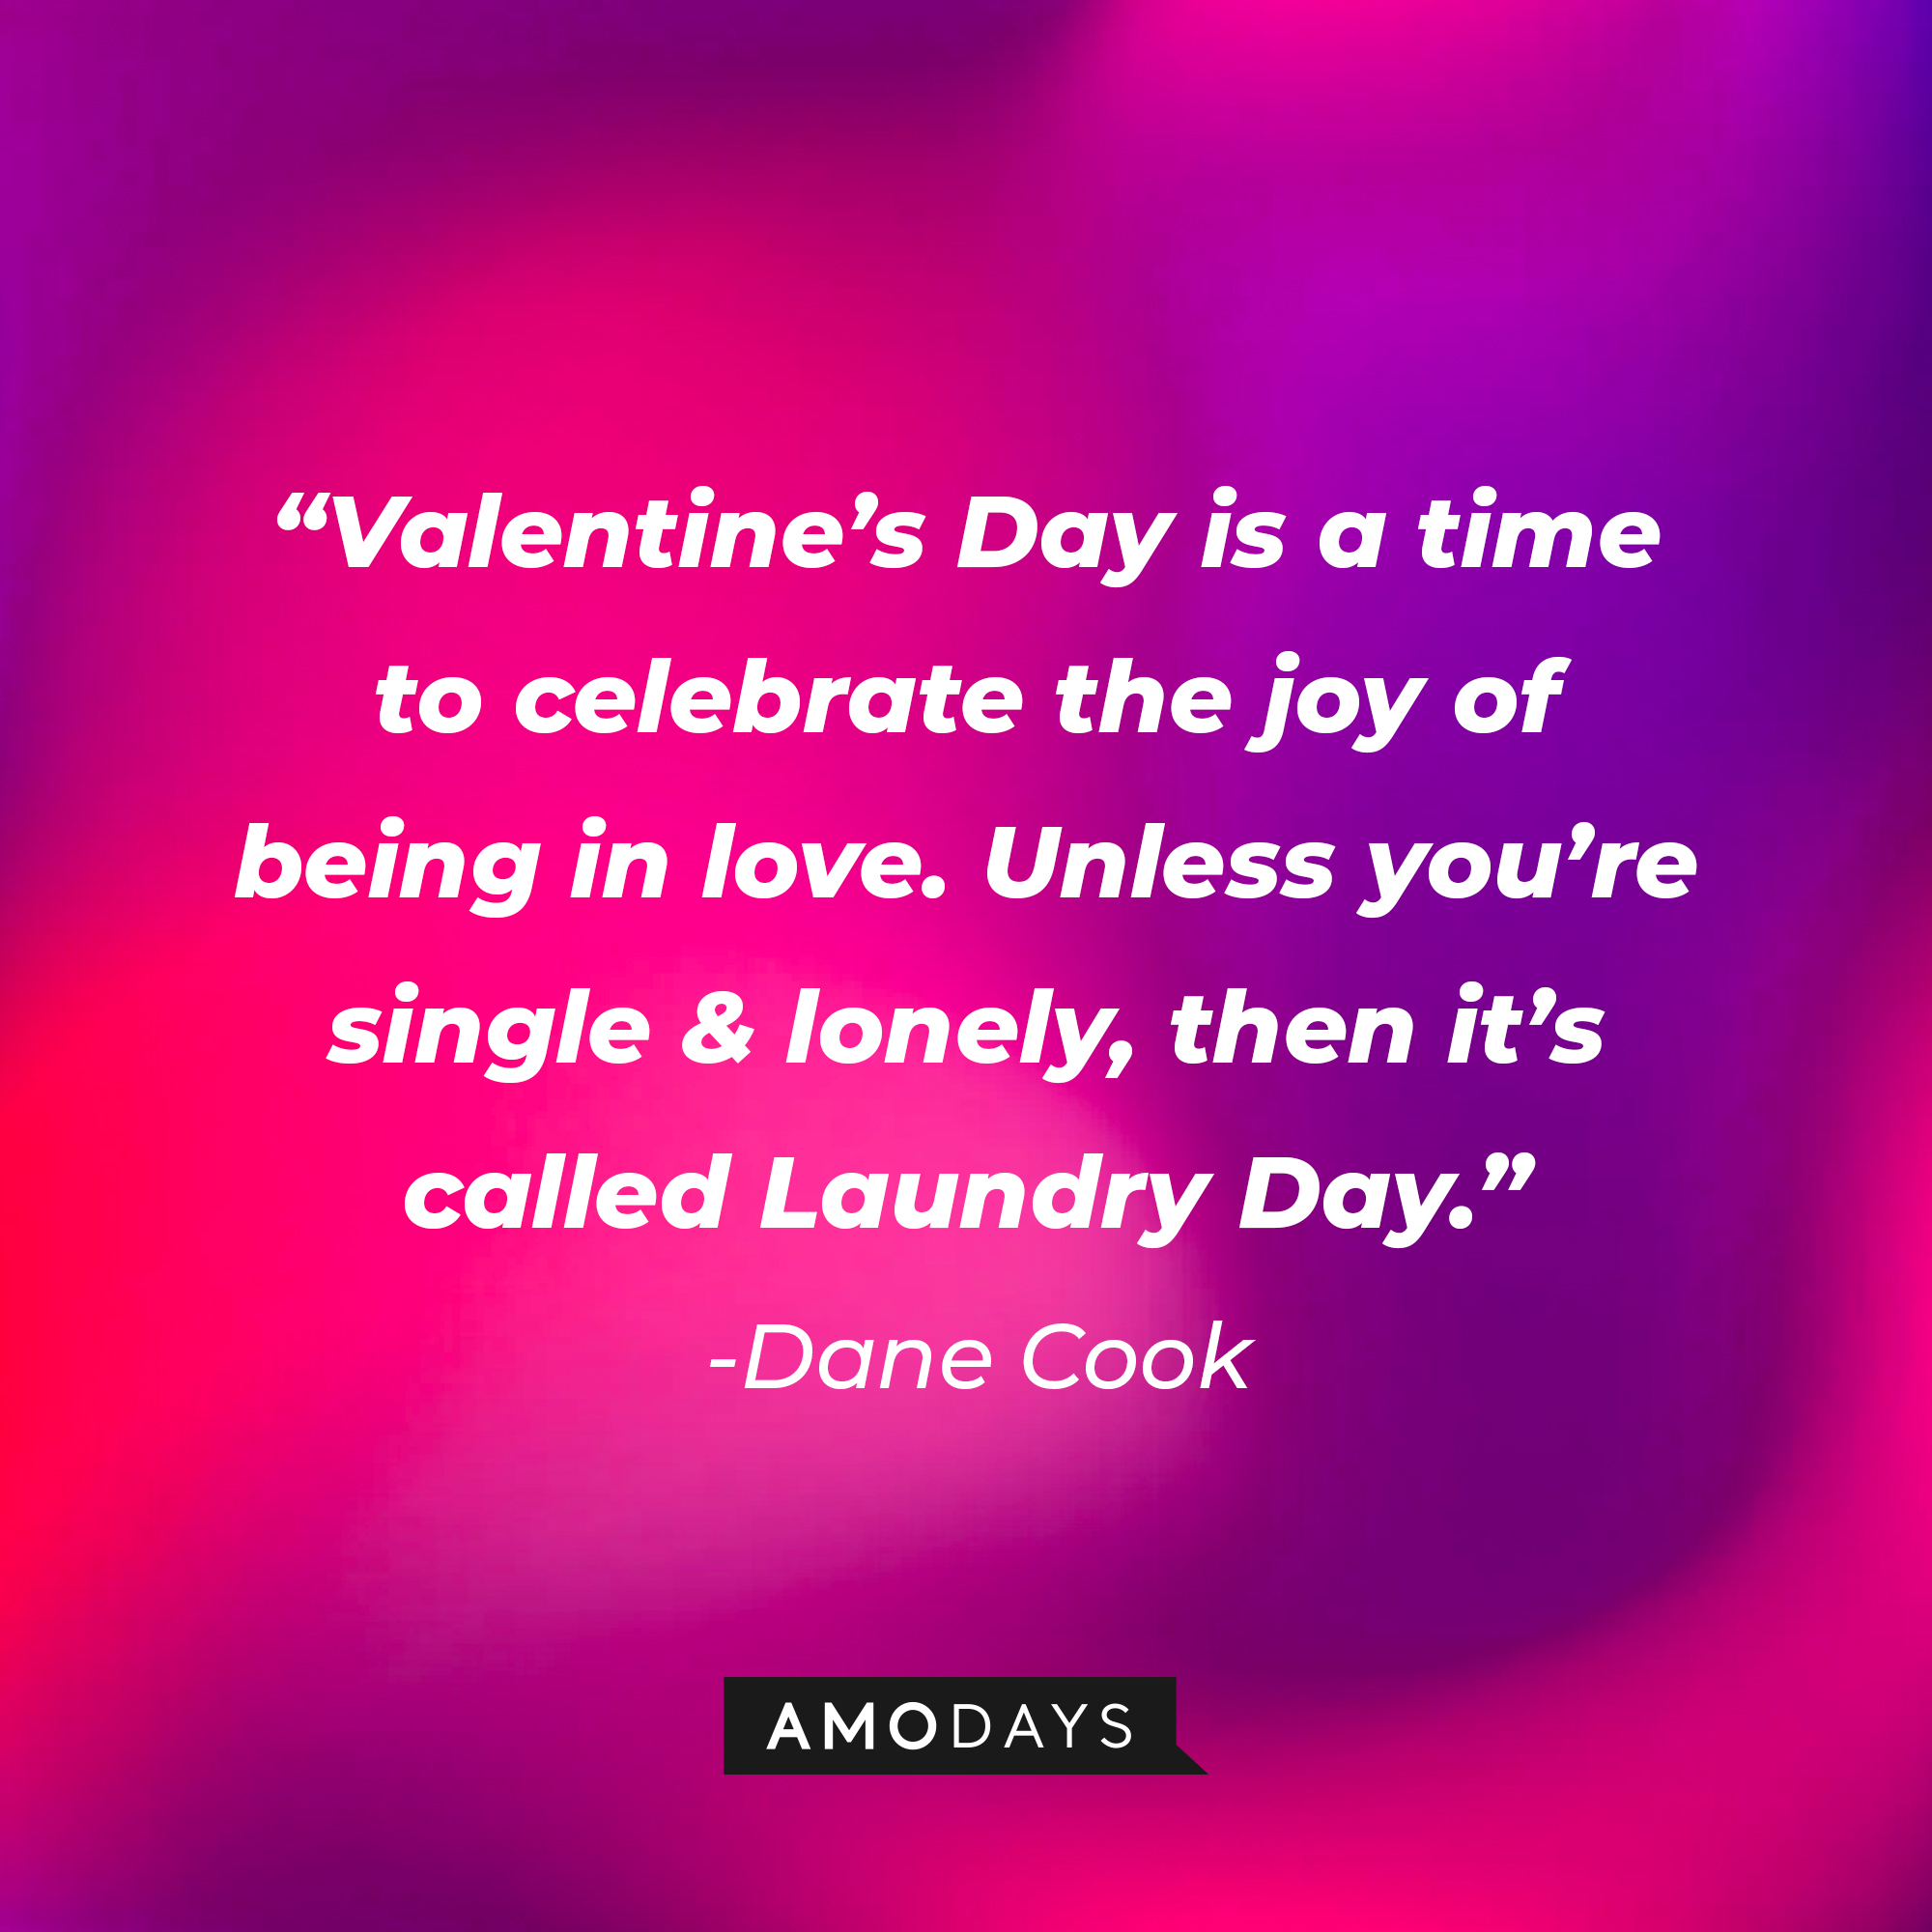 Dane Cook's quote: “Valentine’s Day is a time to celebrate the joy of being in love. Unless you’re single & lonely, then it’s called Laundry Day.” | Source: Amodays